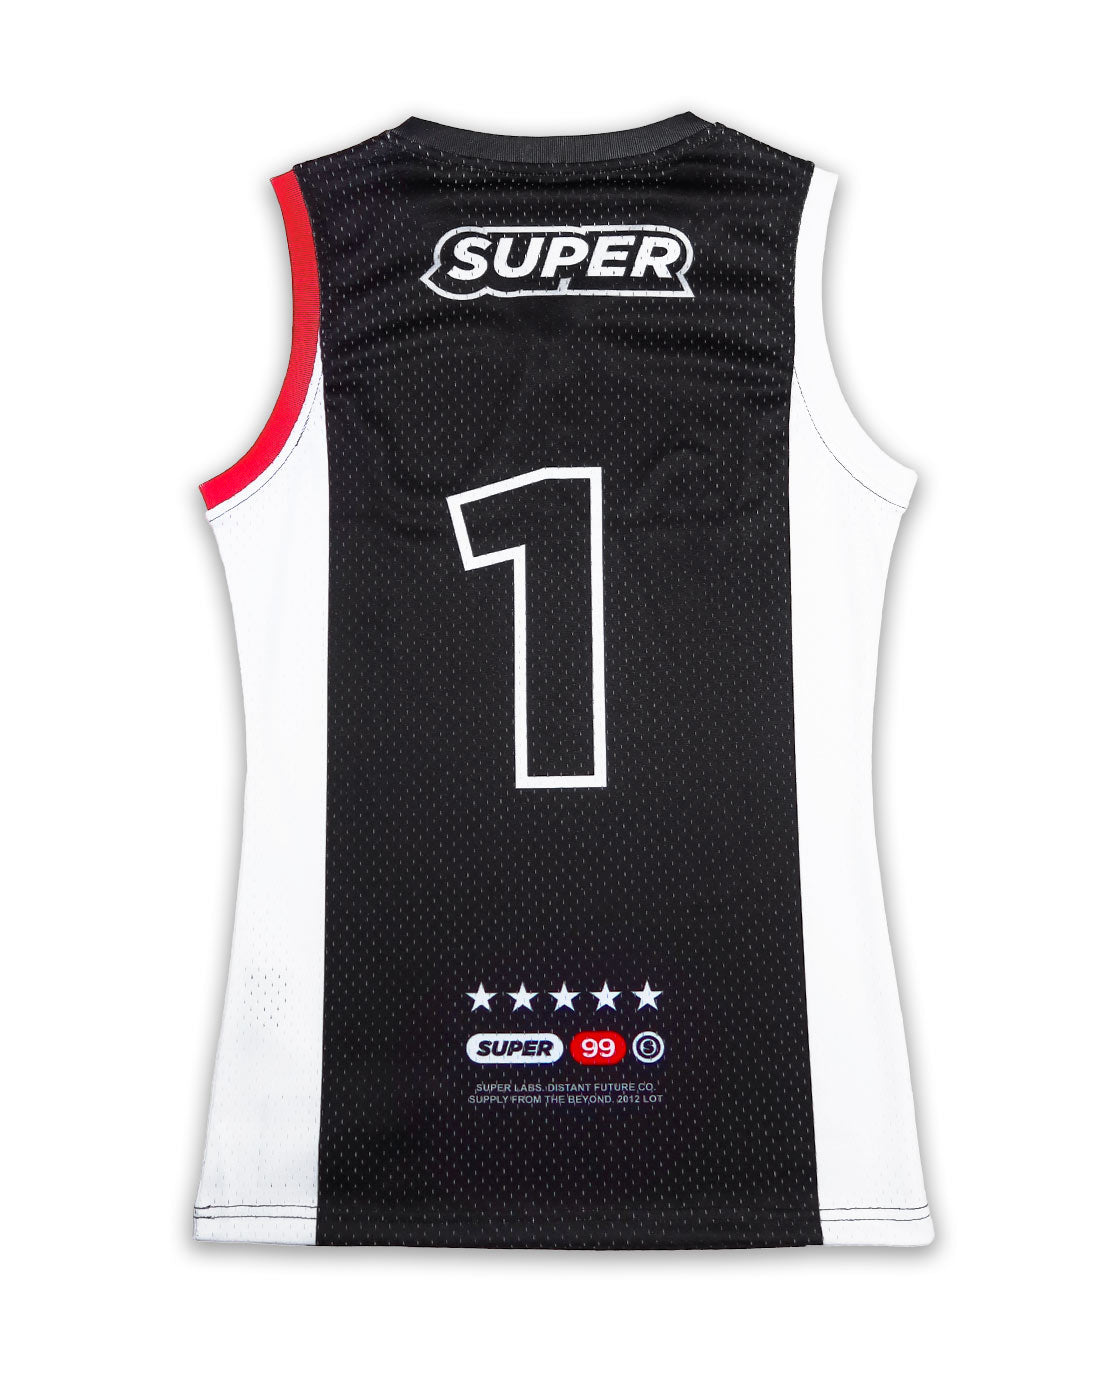 Rear view of a women's basketball jersey in classic black and white, featuring lightweight mesh fabric, sleeveless design, and number 1 printed on the torso.